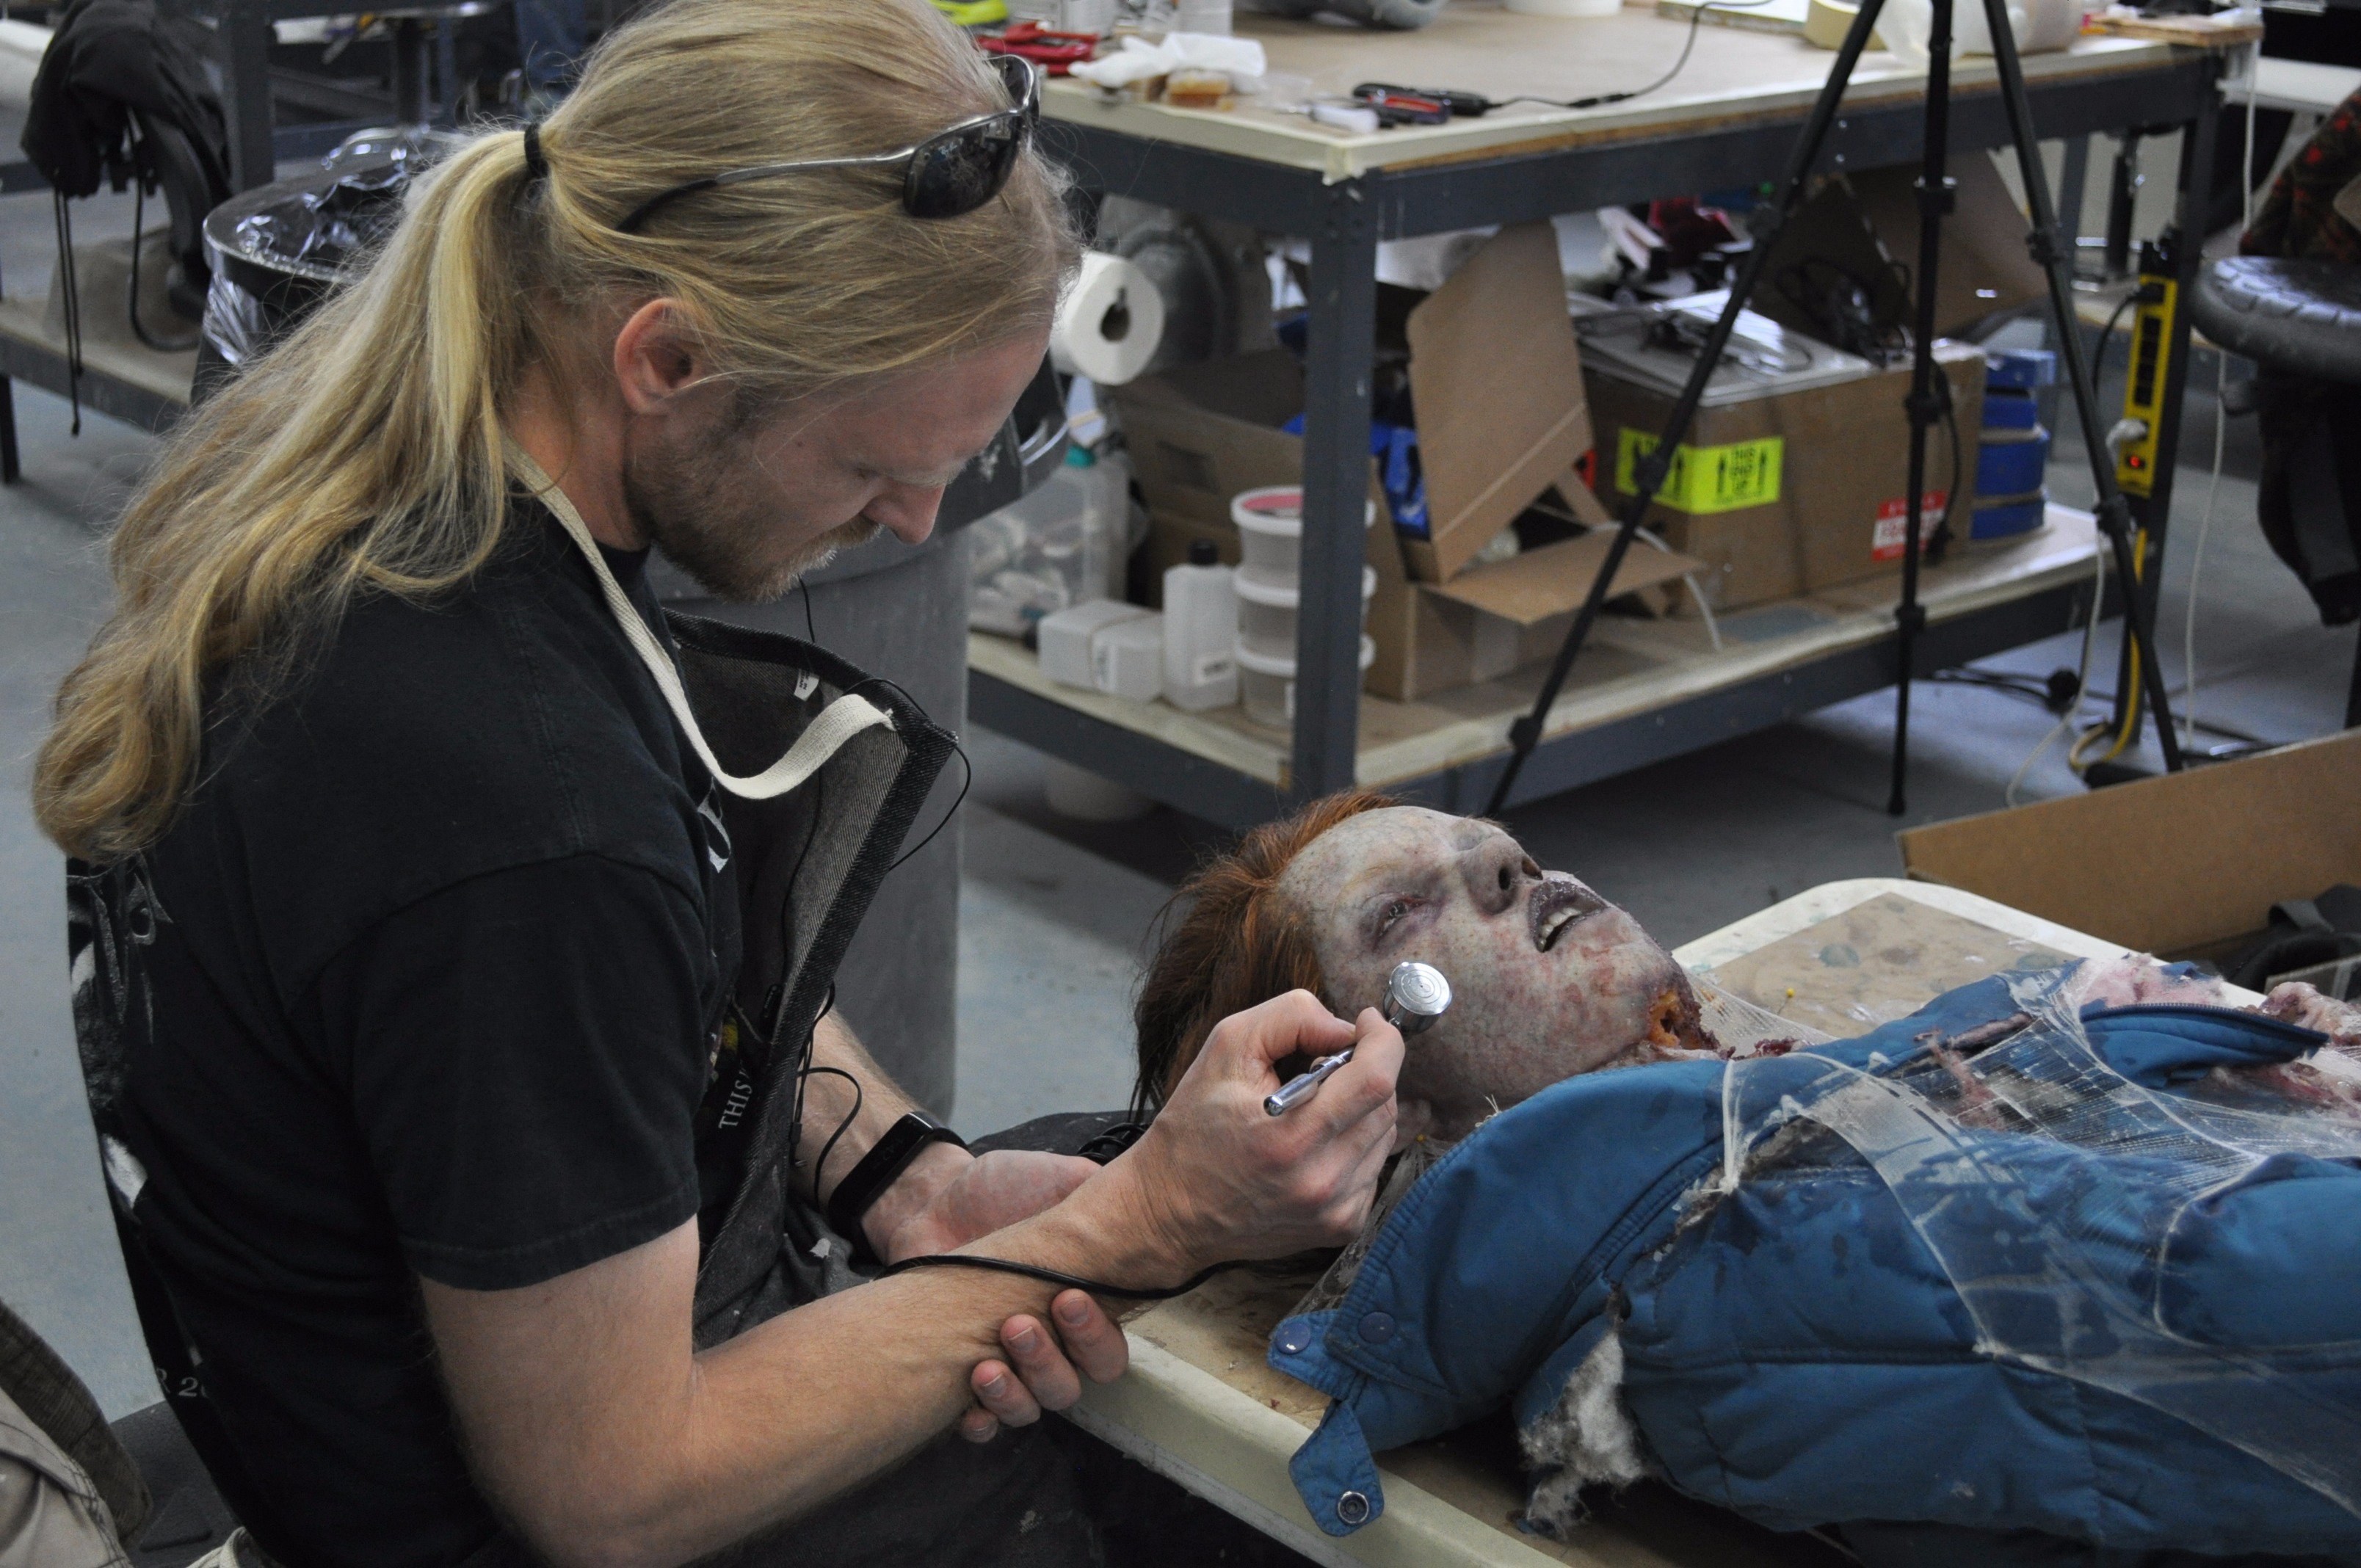 Fractured FX Inc. on X: Our dead #Barb body in progress for #StrangerThings.  #PoorBarb #spfx #specialmakeupeffects #prostheticeffects #props   / X